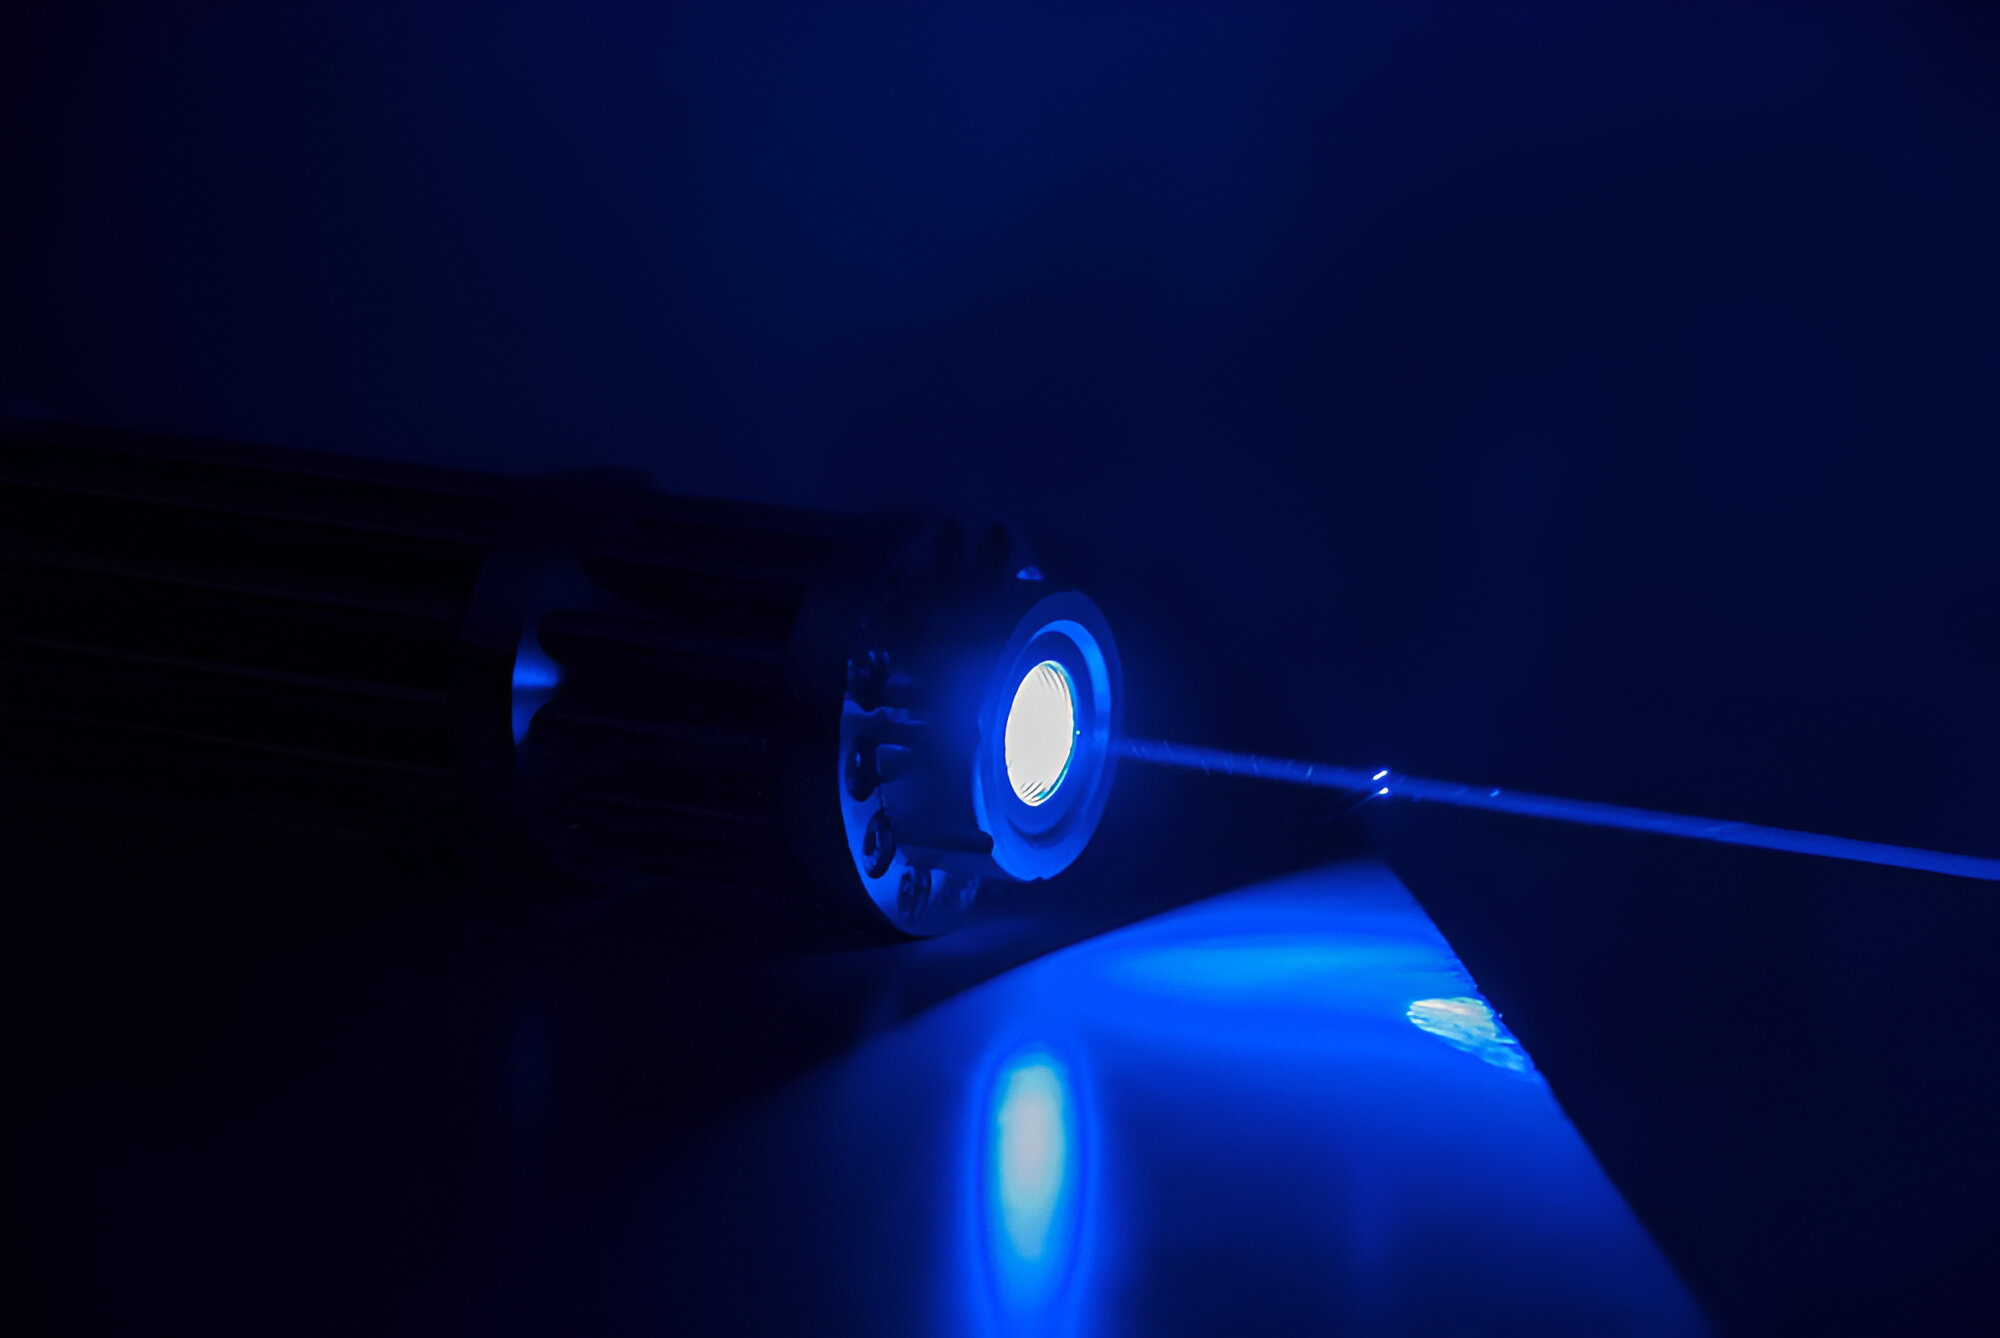 laser-technology-understanding-the-applications-and-uses-of-blue-light-laser-pens